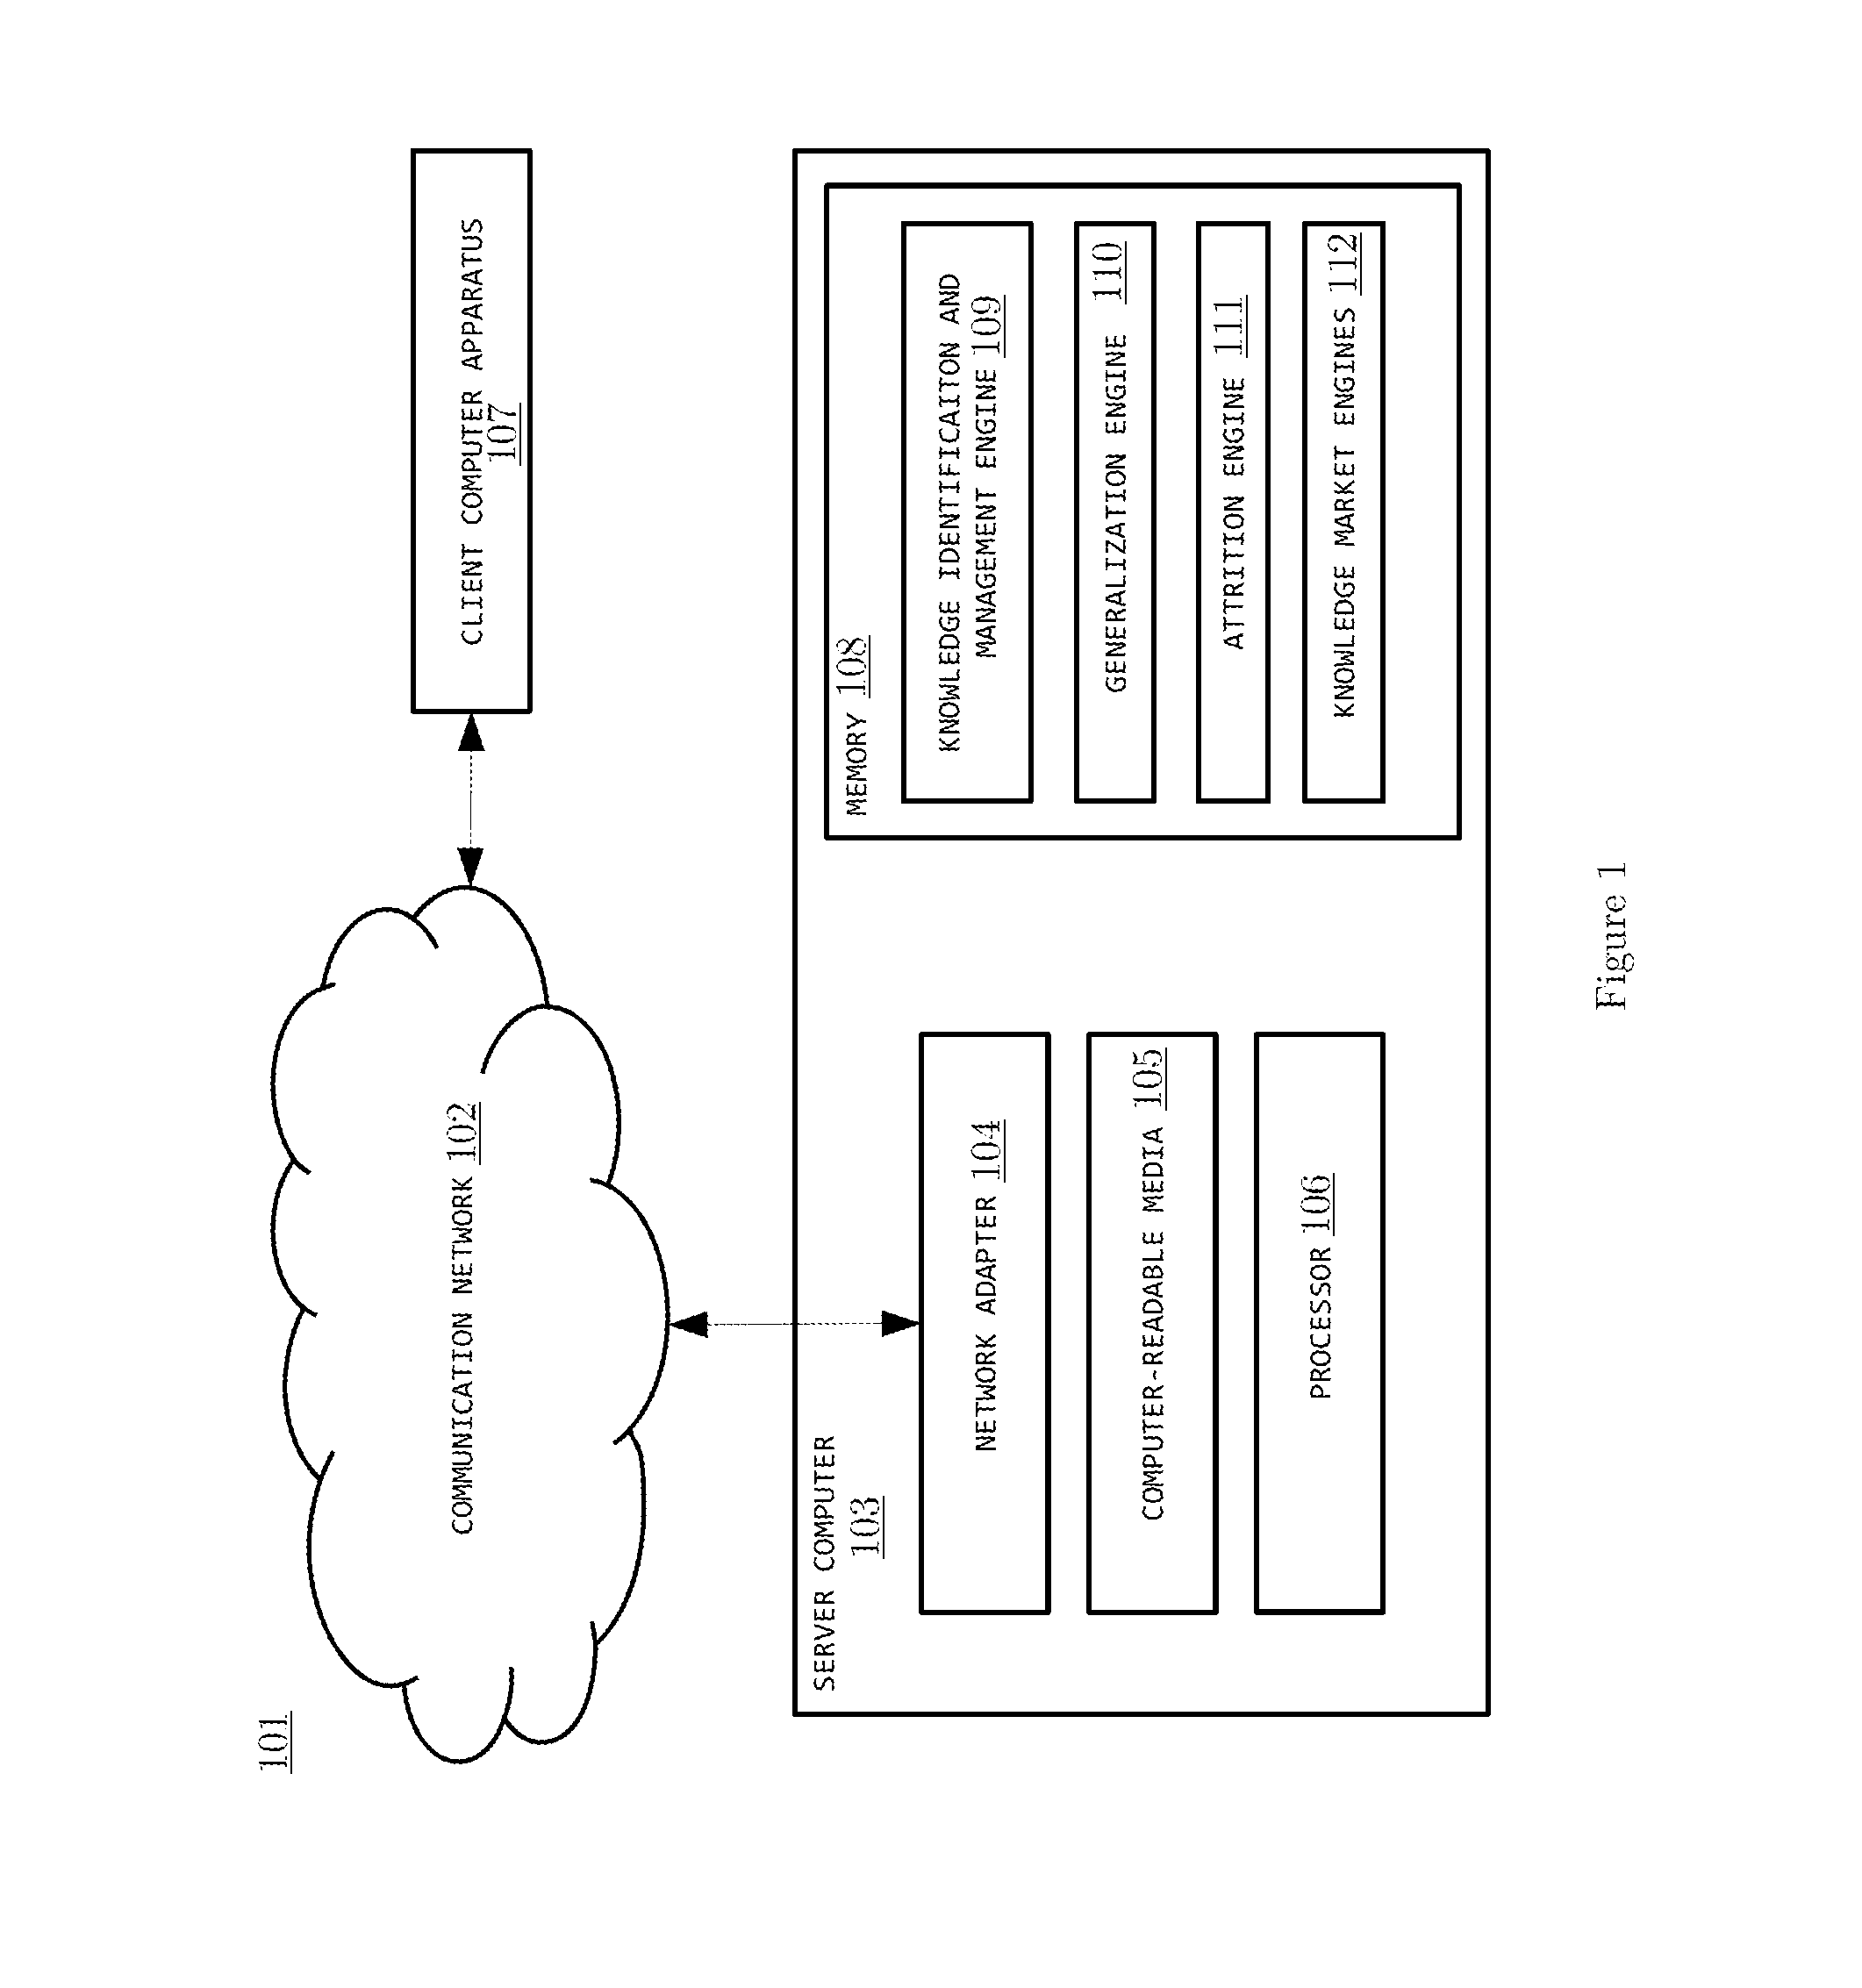 Methods, systems, and articles of manufacture for the management and identification of causal knowledge